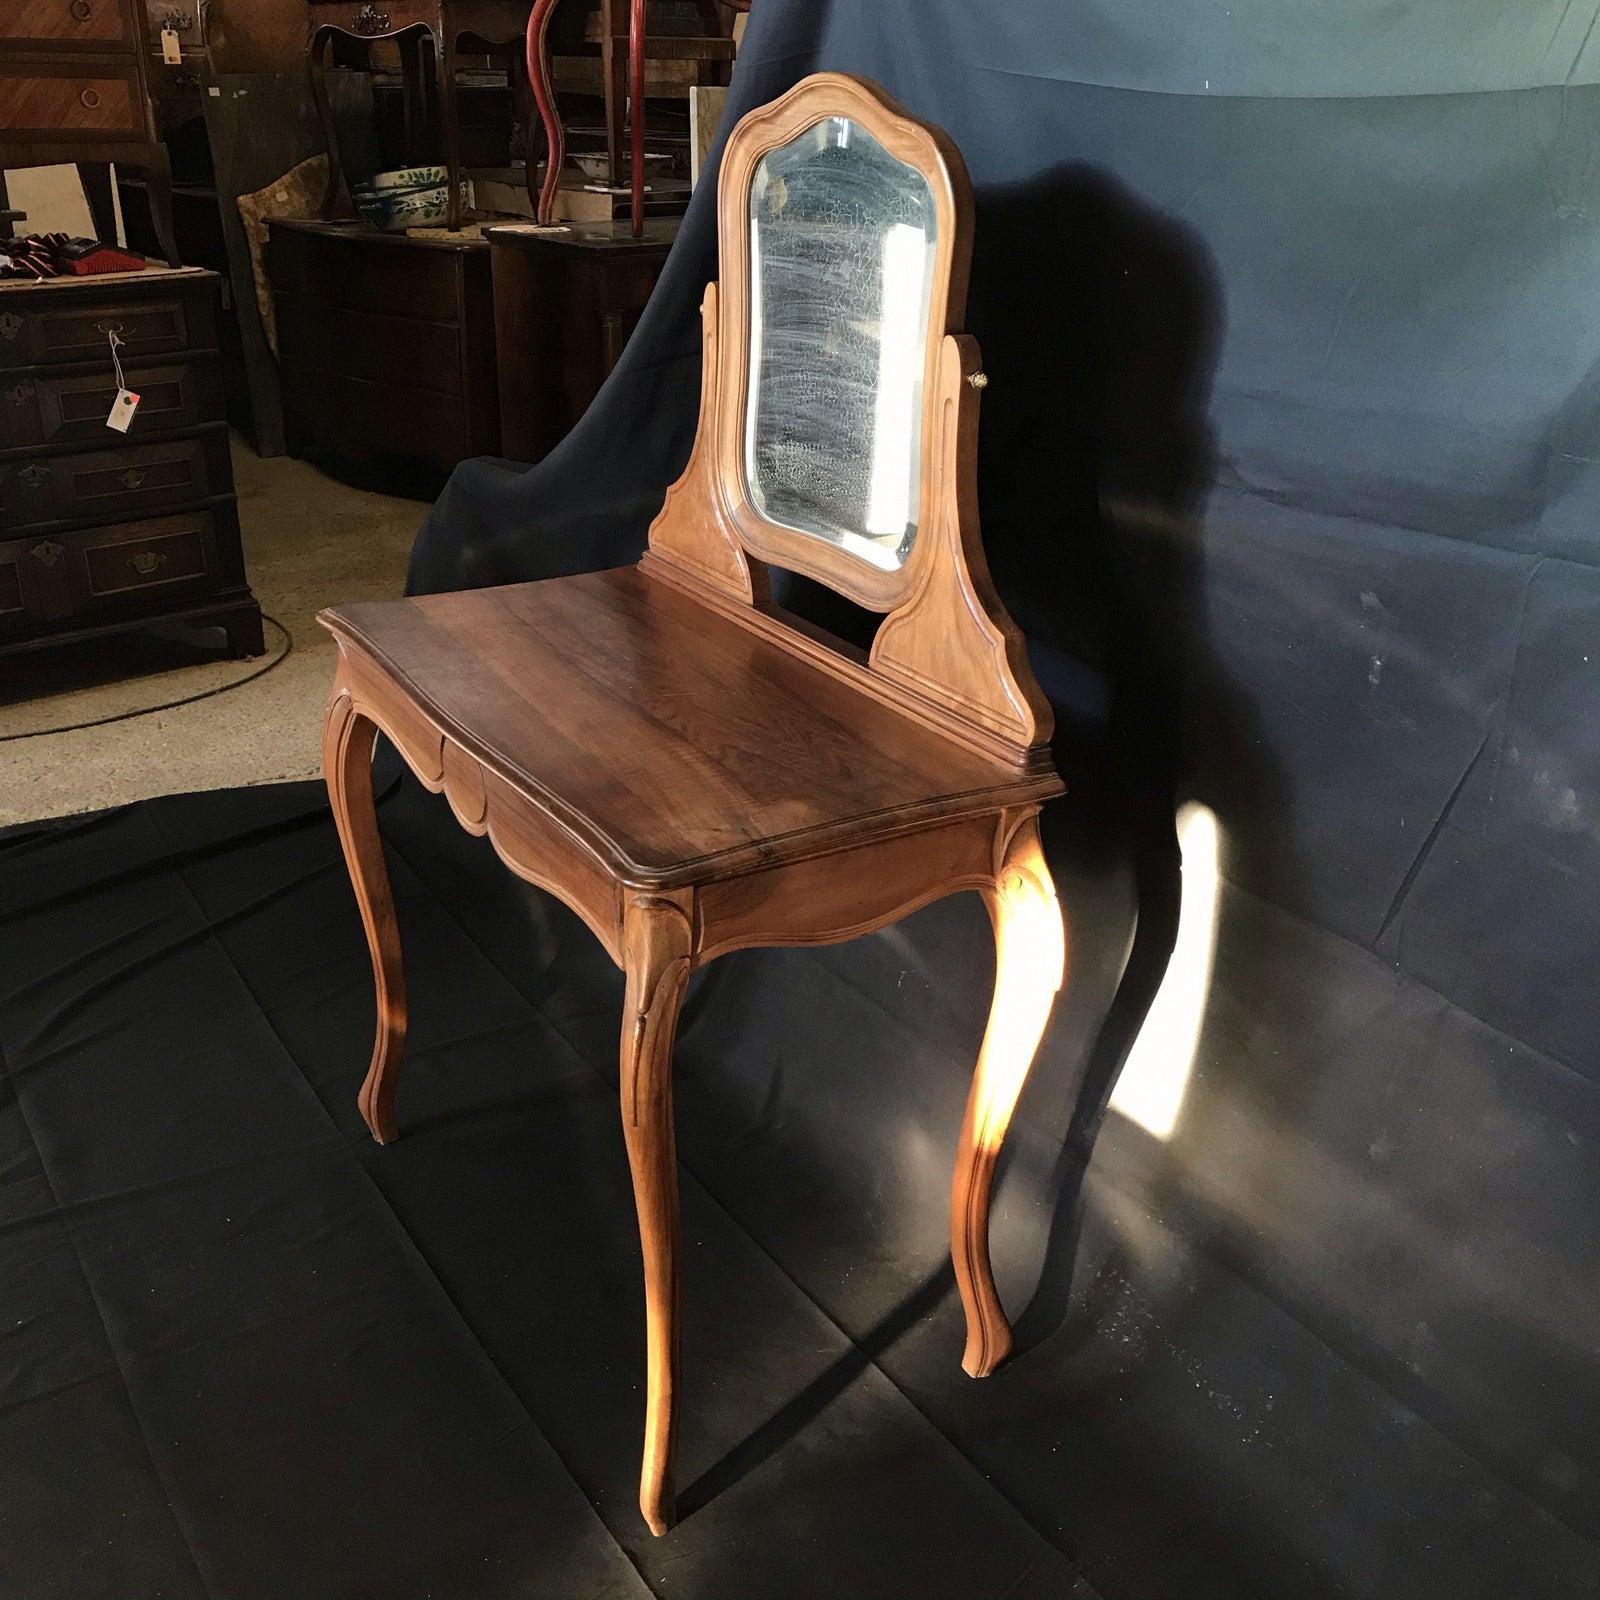 Beautiful French walnut dressing table or vanity with beveled mirror, bought in the South of France. Single drawer having scalloped bottom and handsome circle decoration and elegant cabriole legs.

Measures: H desk top 30”, H skirt 24.5” 
#4337.